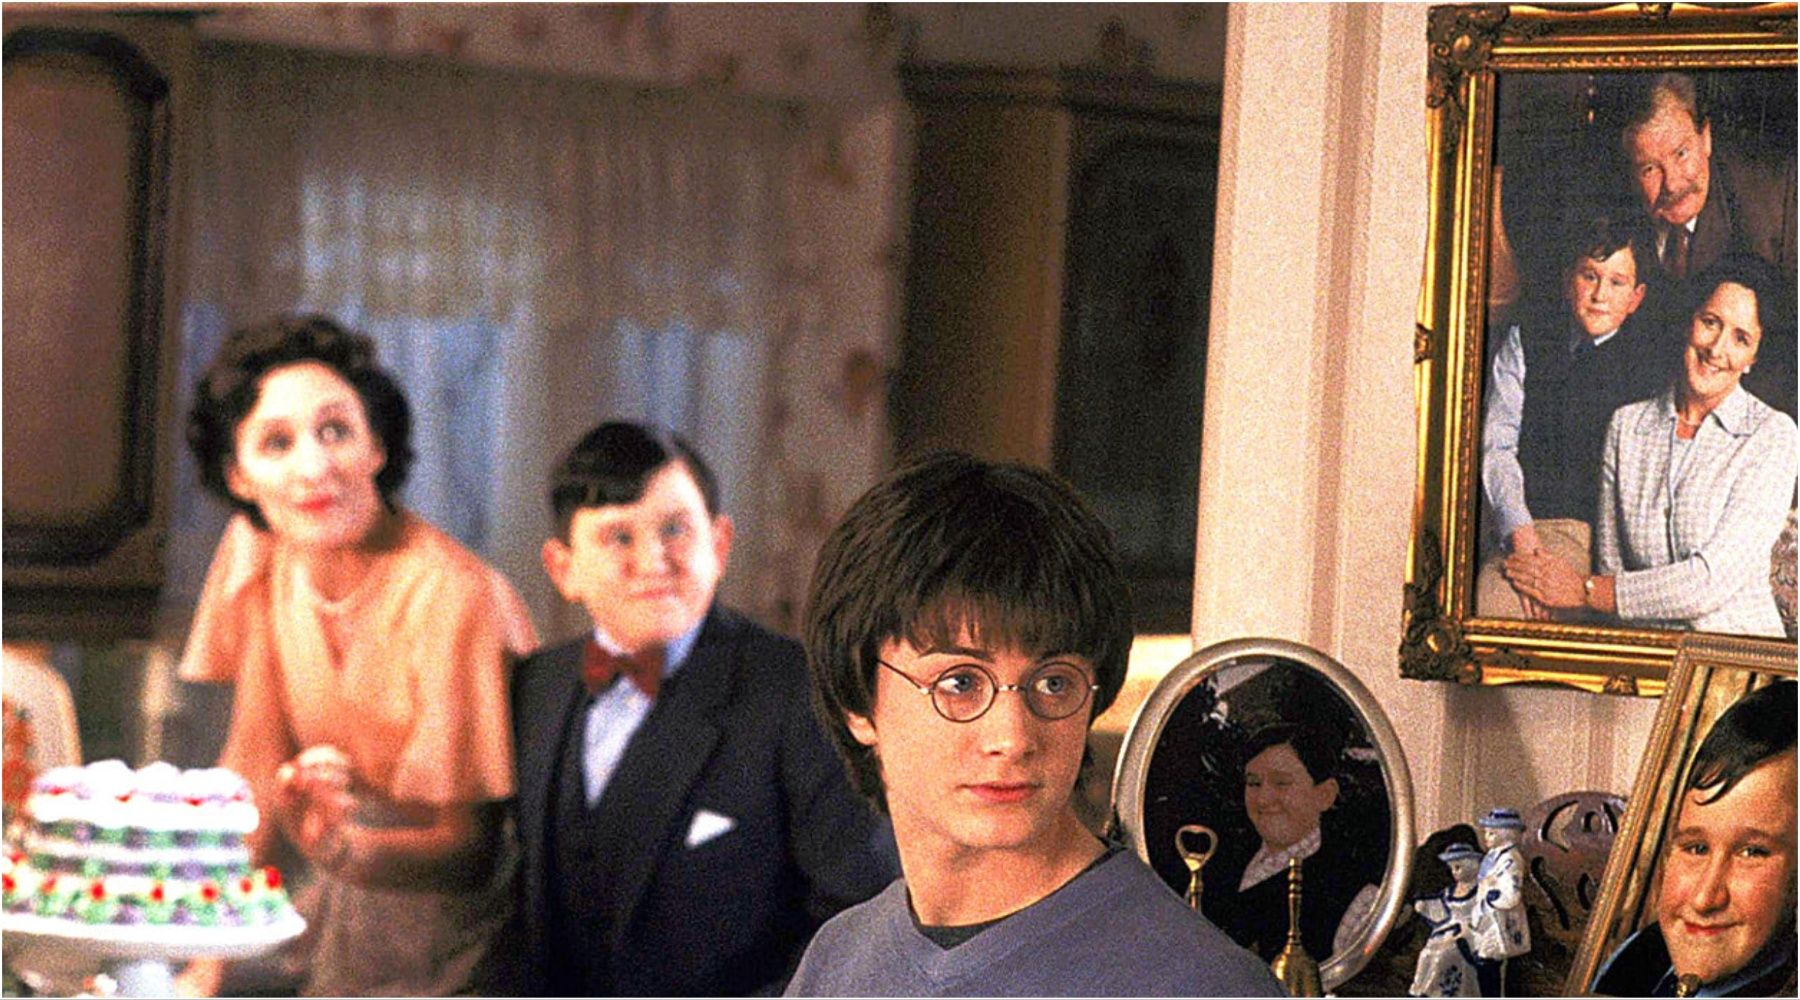 Petunia And Dudley Dursley And Harry Potter In Harry Potter.